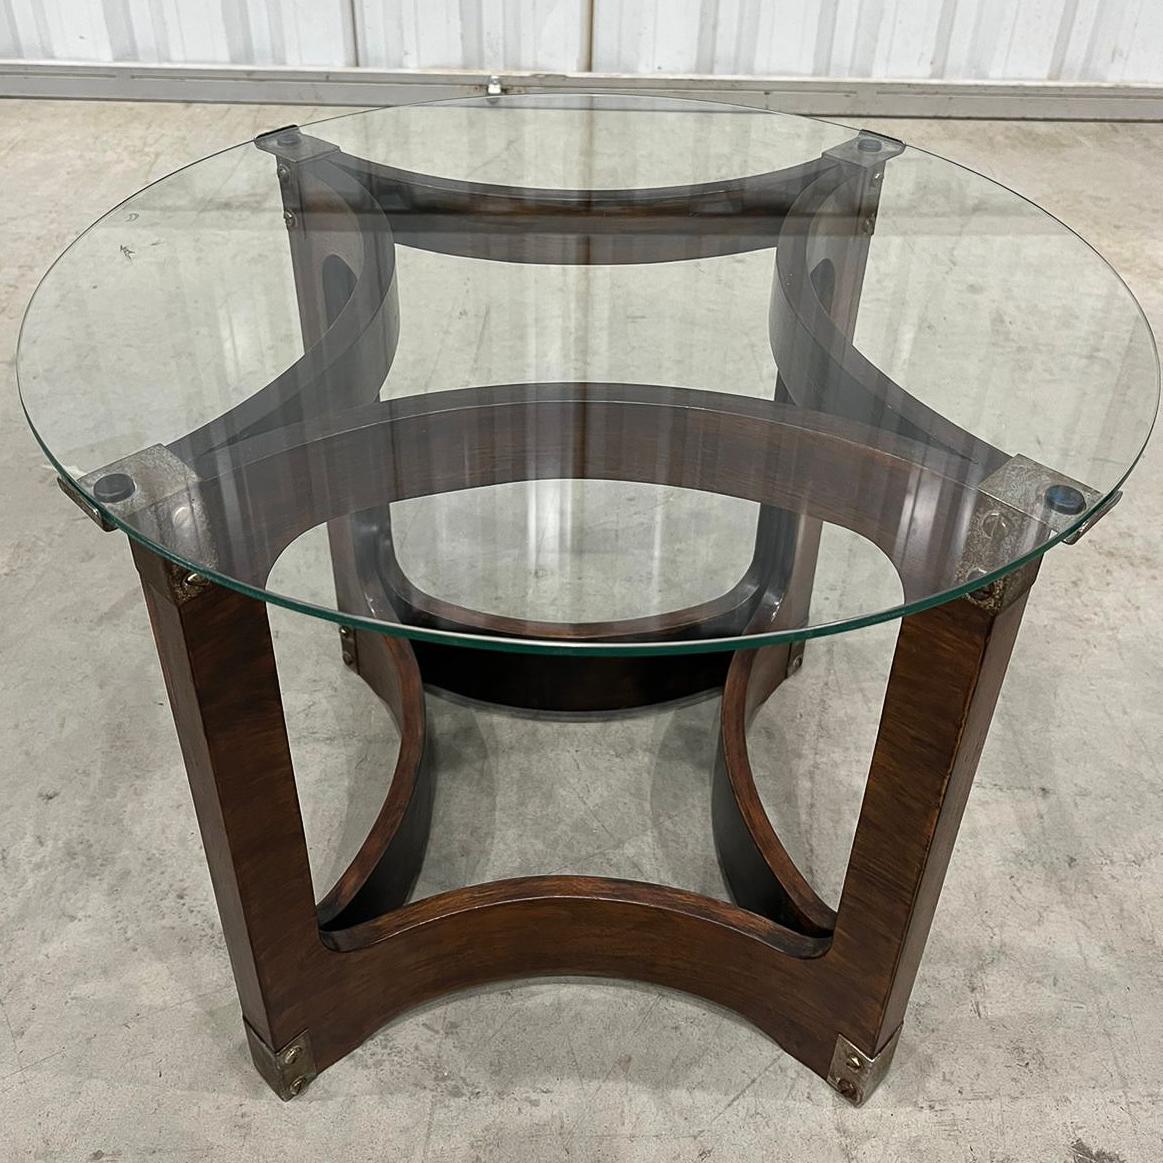 Mid-Century Modern Side Table in Bentwood & Glass by Novo Rumo, 1960s, Brazil In Good Condition For Sale In New York, NY